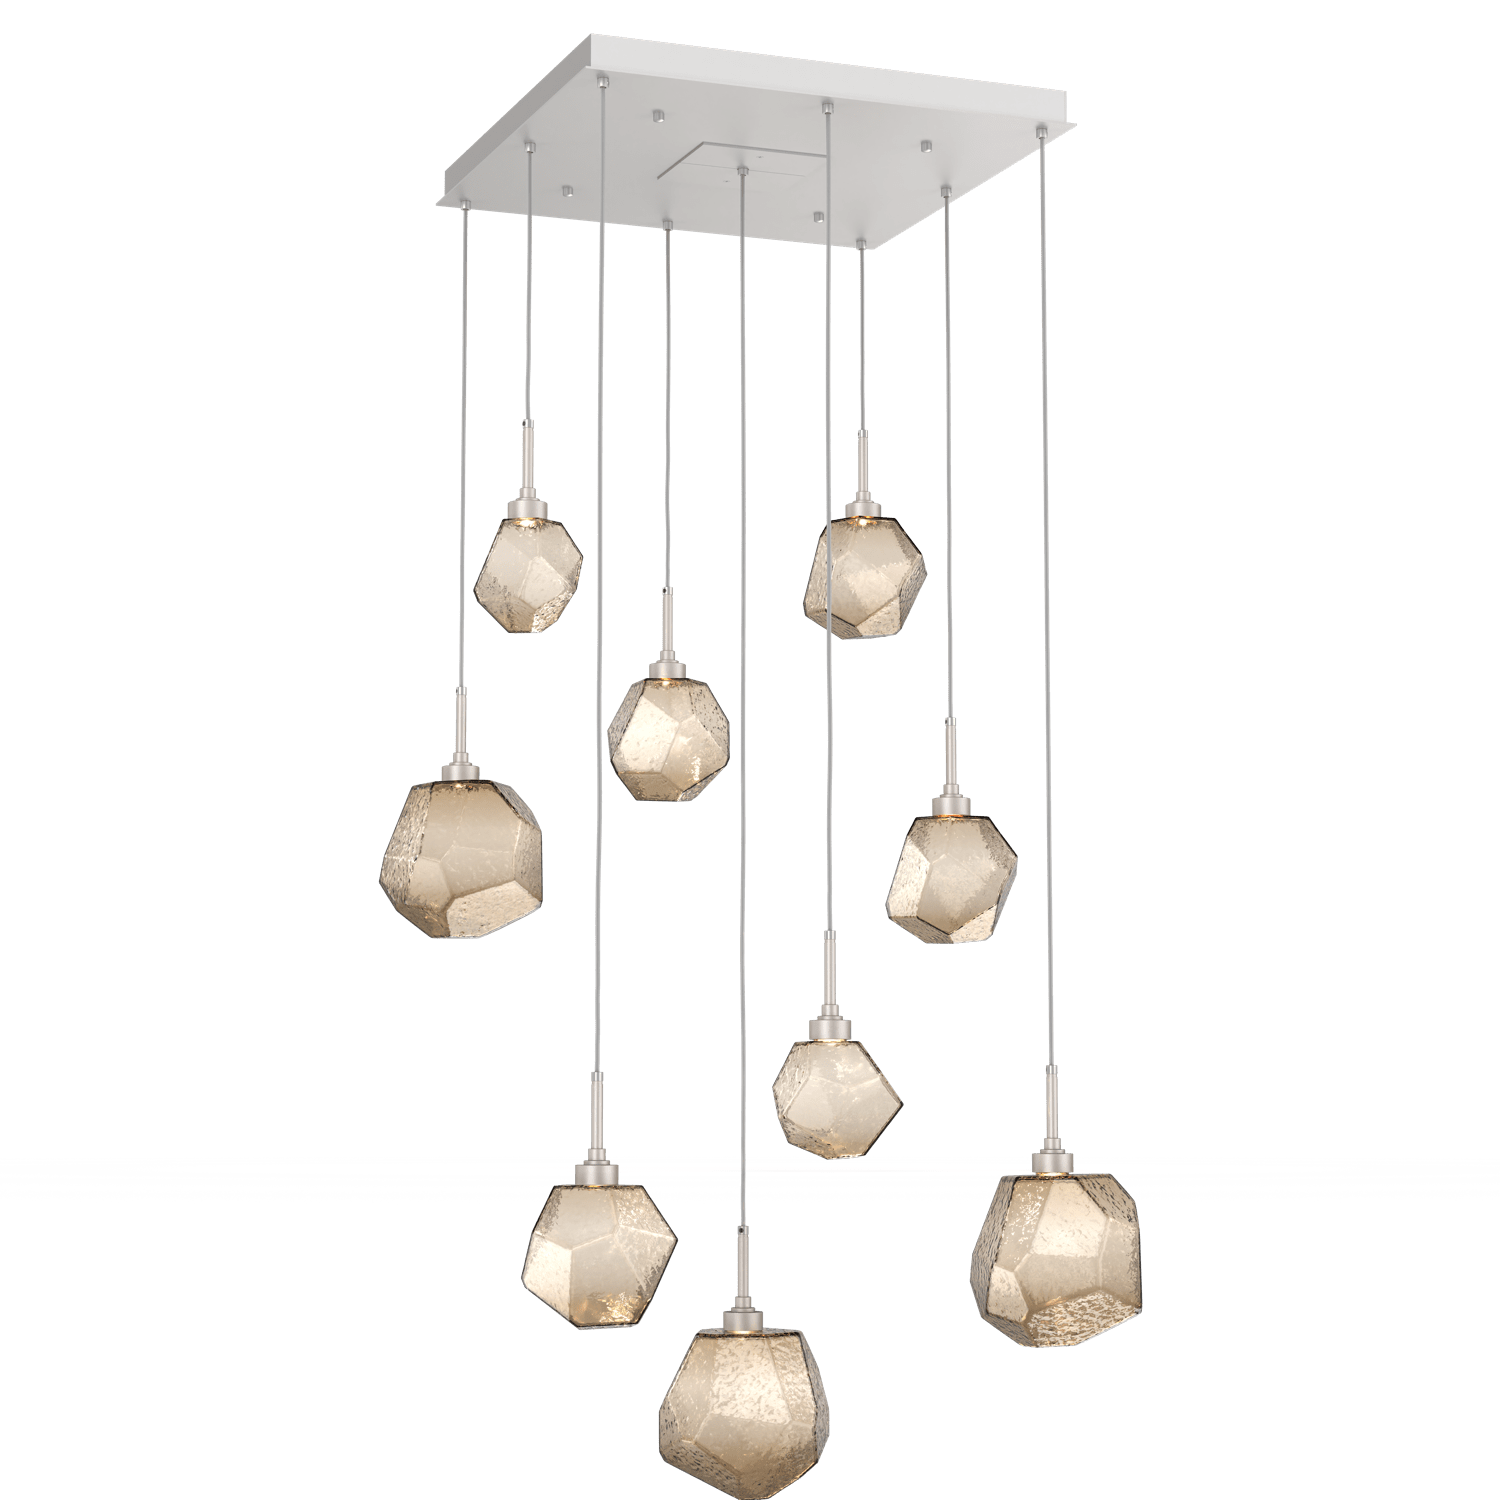 CHB0039-09-BS-B-Hammerton-Studio-Gem-9-light-square-pendant-chandelier-with-metallic-beige-silver-finish-and-bronze-blown-glass-shades-and-LED-lamping